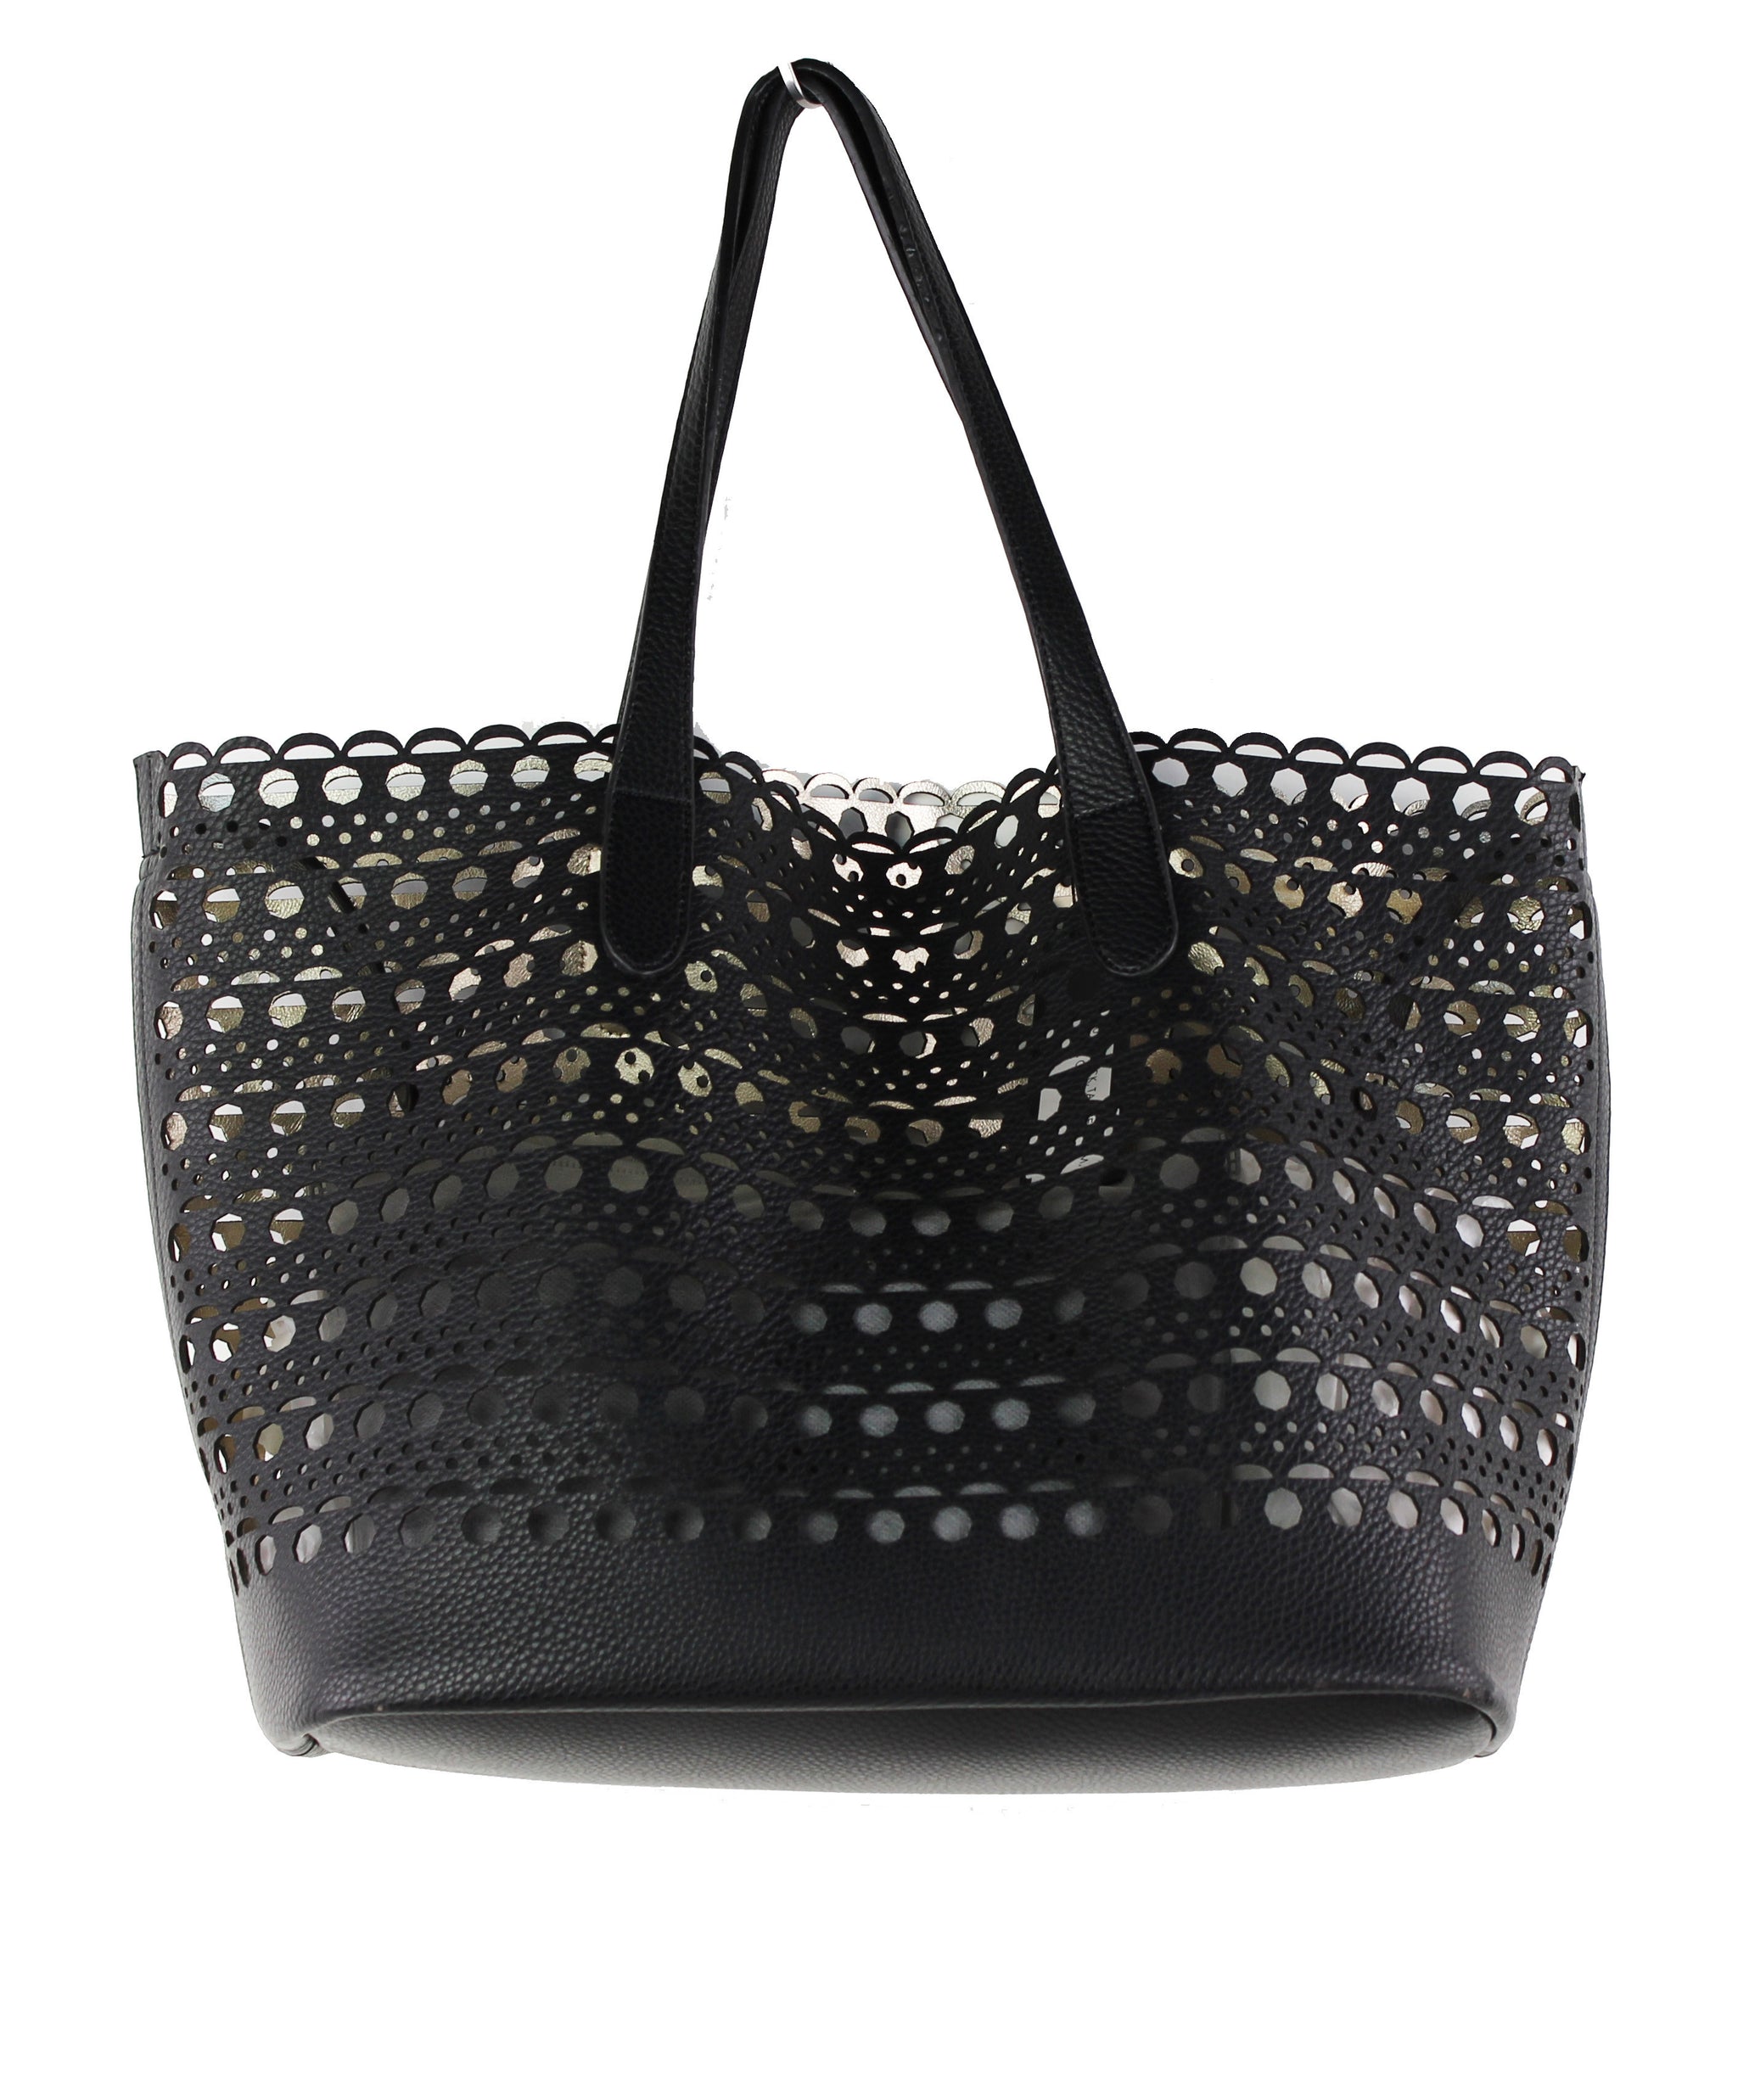 PERFORATED TOTE - Tias Place